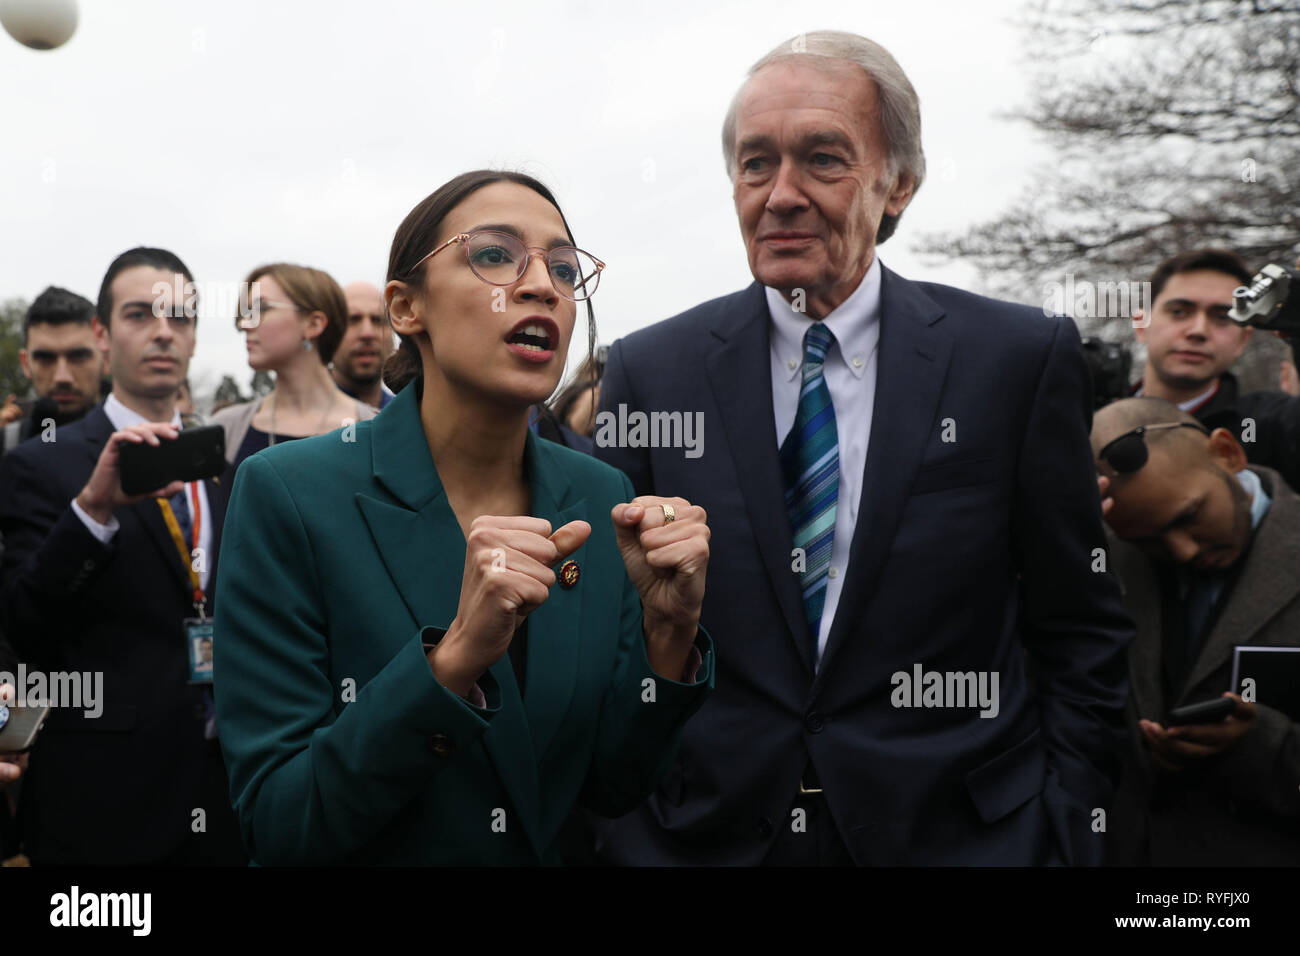 U.S. Rep. Alexandria Ocasio-Cortez, and Senator Ed Markey answers questions during the announcement for the Green New Deal legislation during a press conference outside the Capitol Building February 7, 2019 in Washington, D.C. Stock Photo